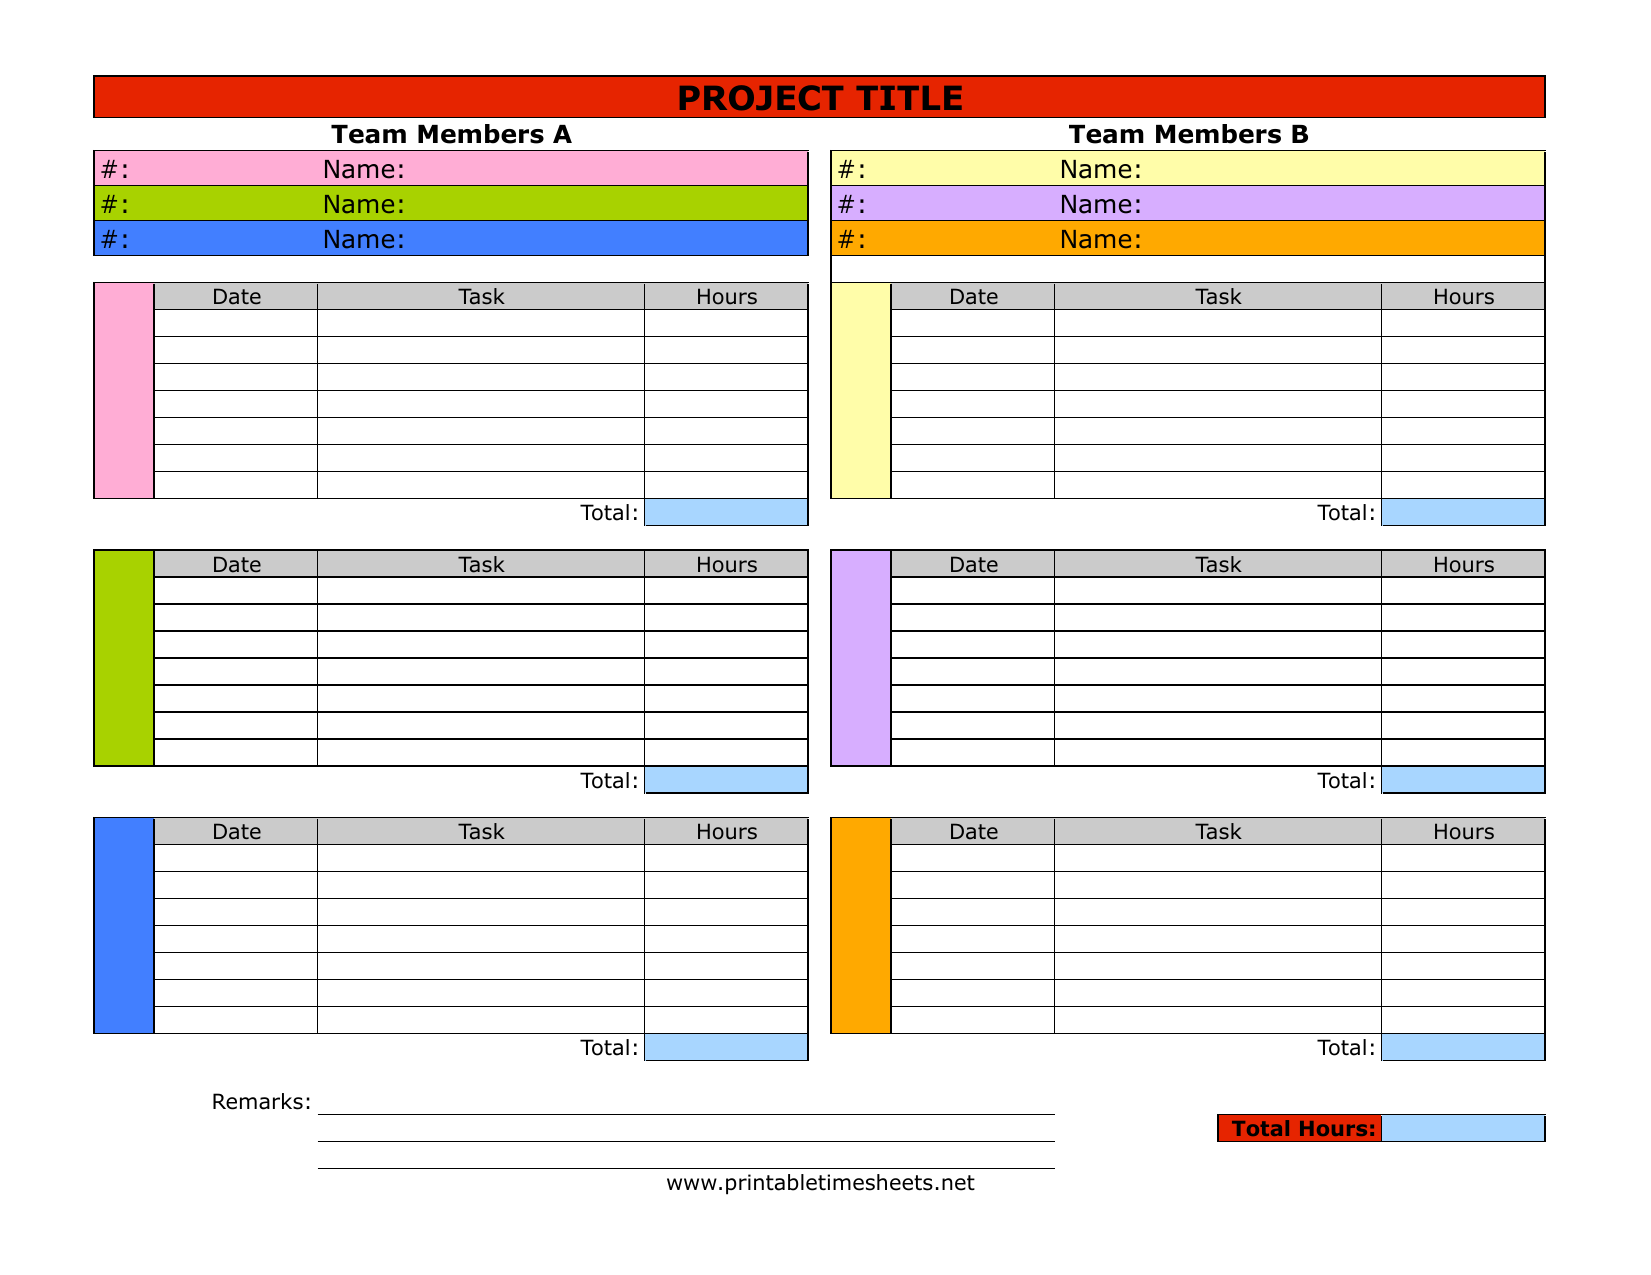 Free Excel Timesheet Template With Tasks in Excel Timesheet Template With Tasks xls